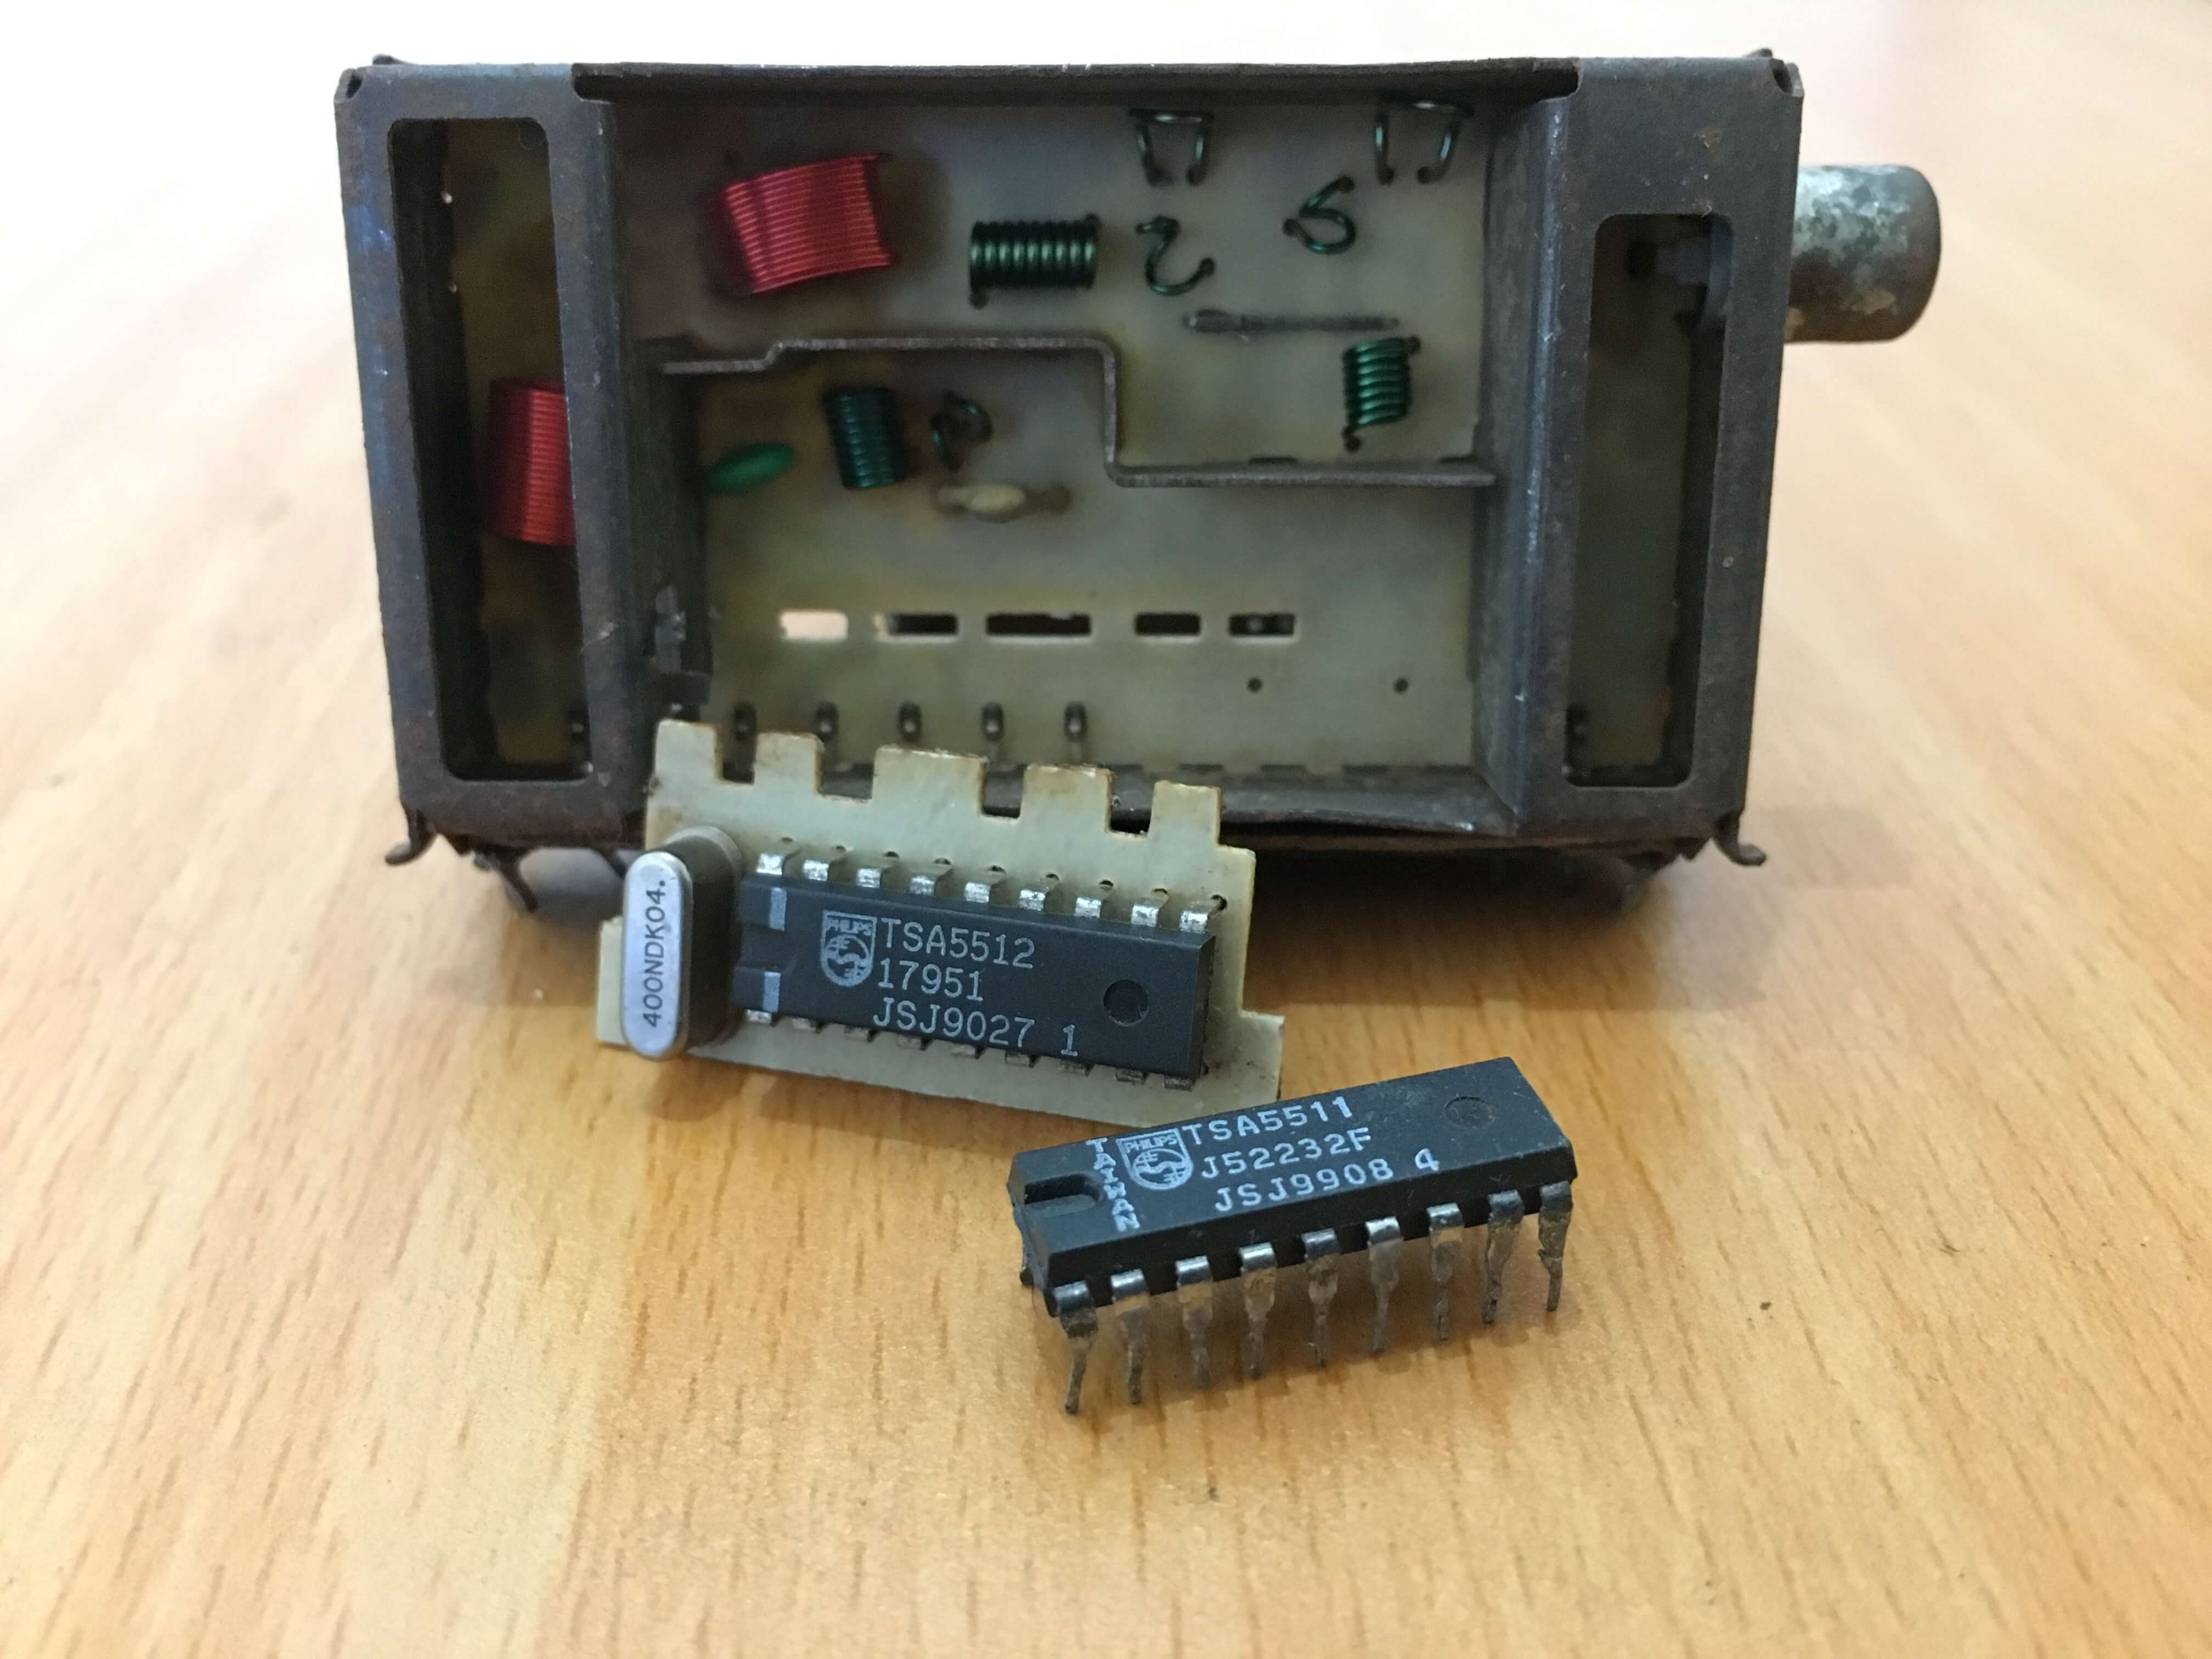 Chip removed from an old TV tuner